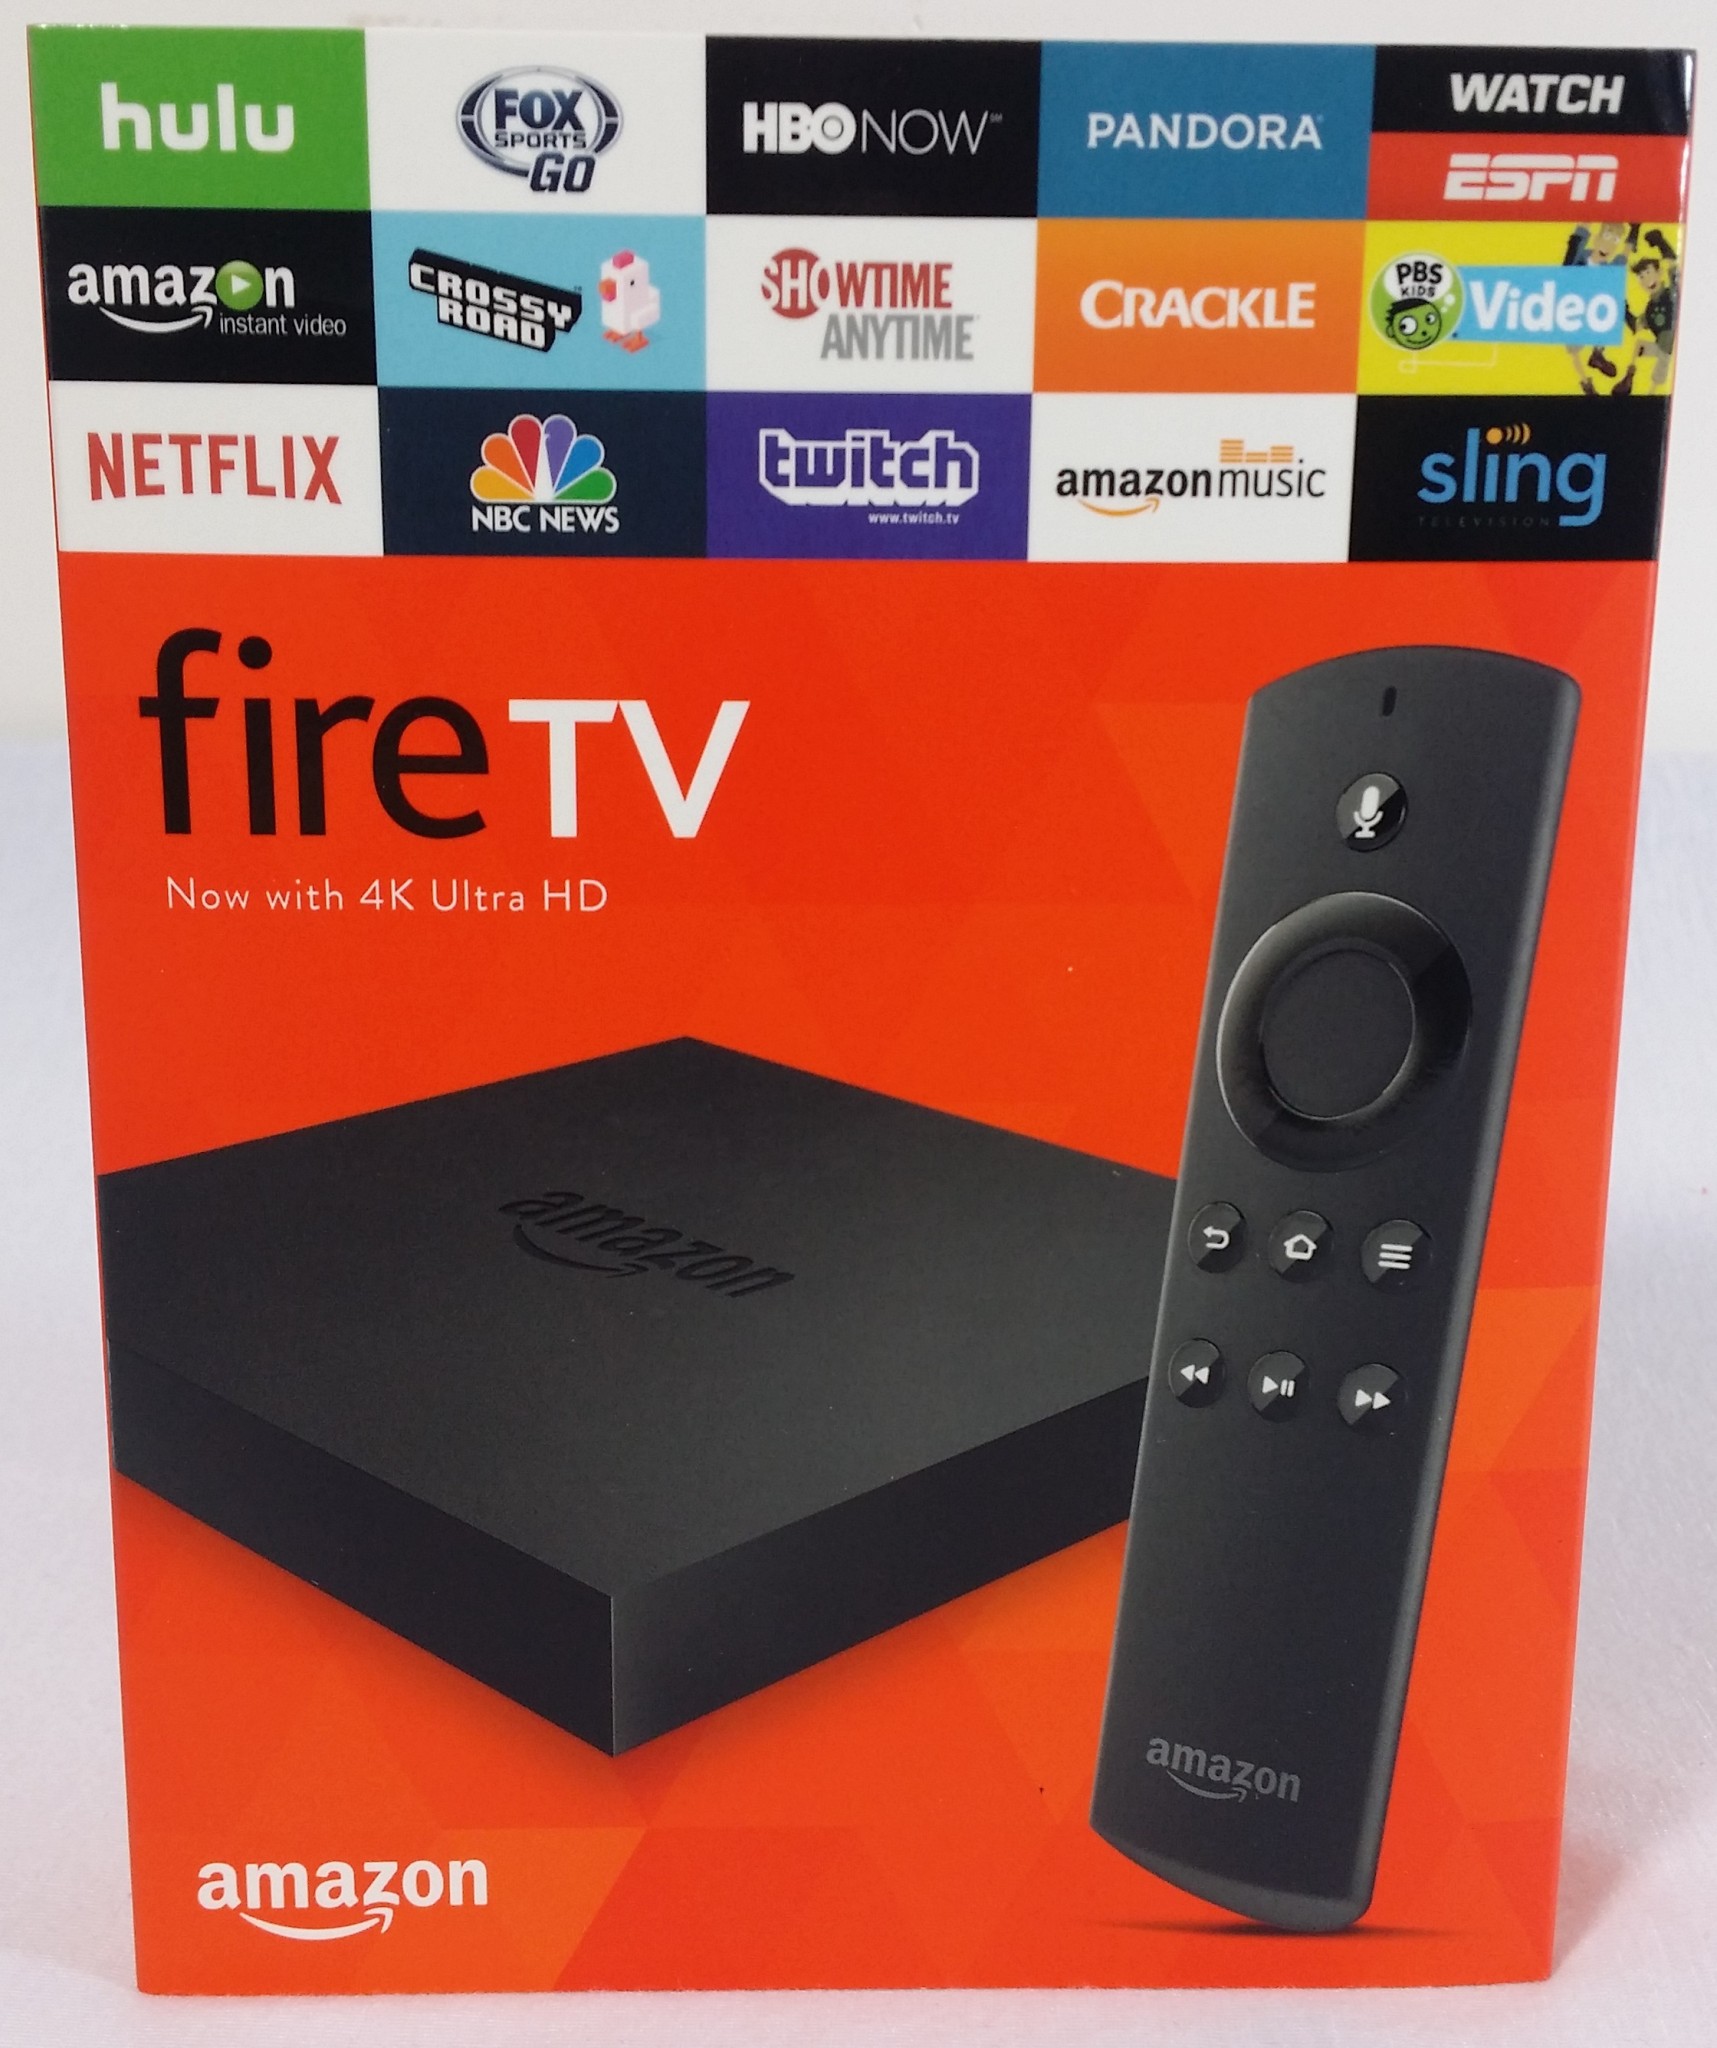 How To Put Batteries into the Fire TV 2 Remote